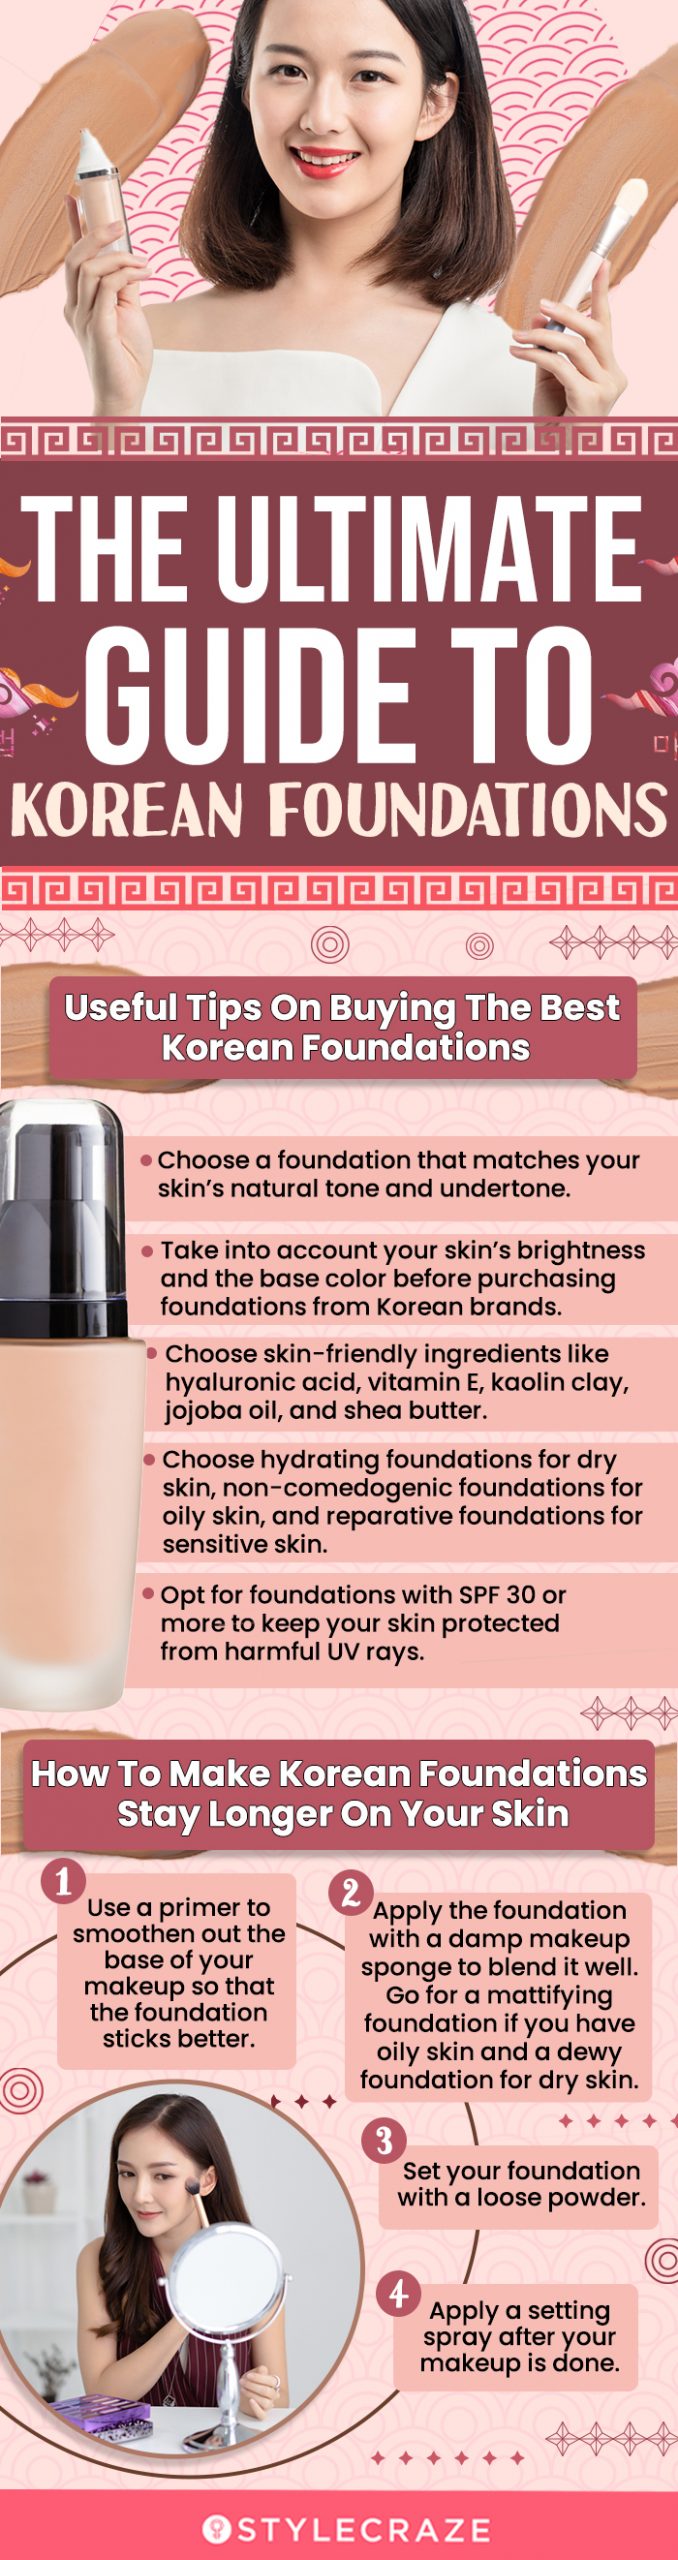 A Guide To Korean Foundations: Buying Tips & How To Make Them Last Longer [infographic]